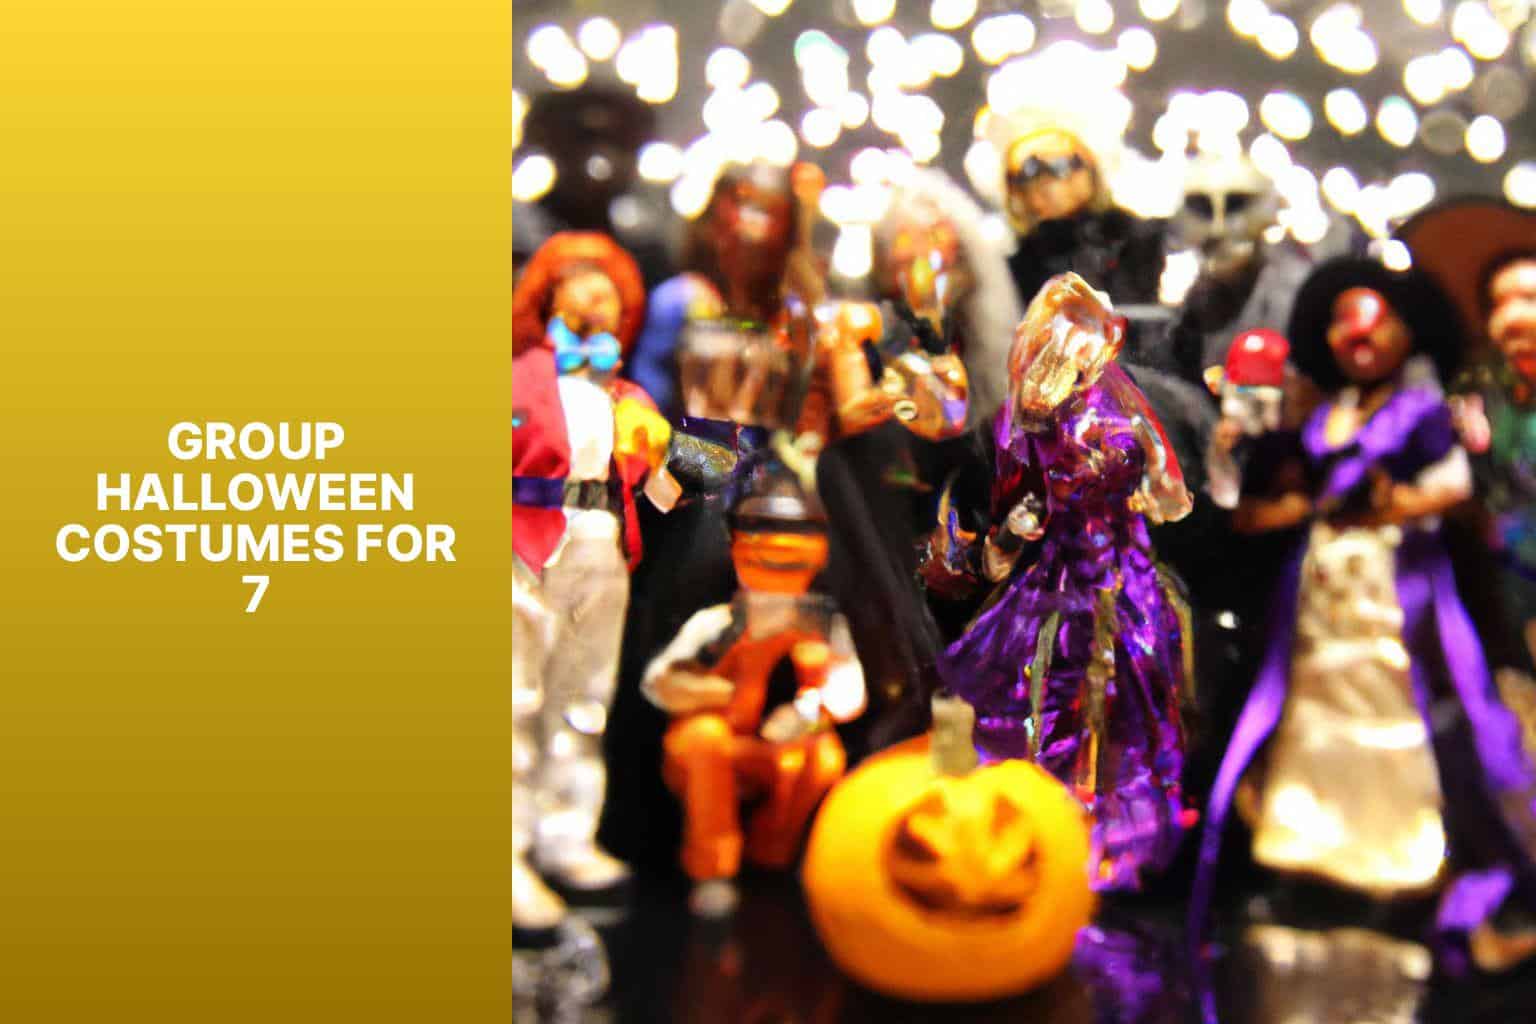 Group Halloween Costumes for 7 - group halloween costumes for 7 